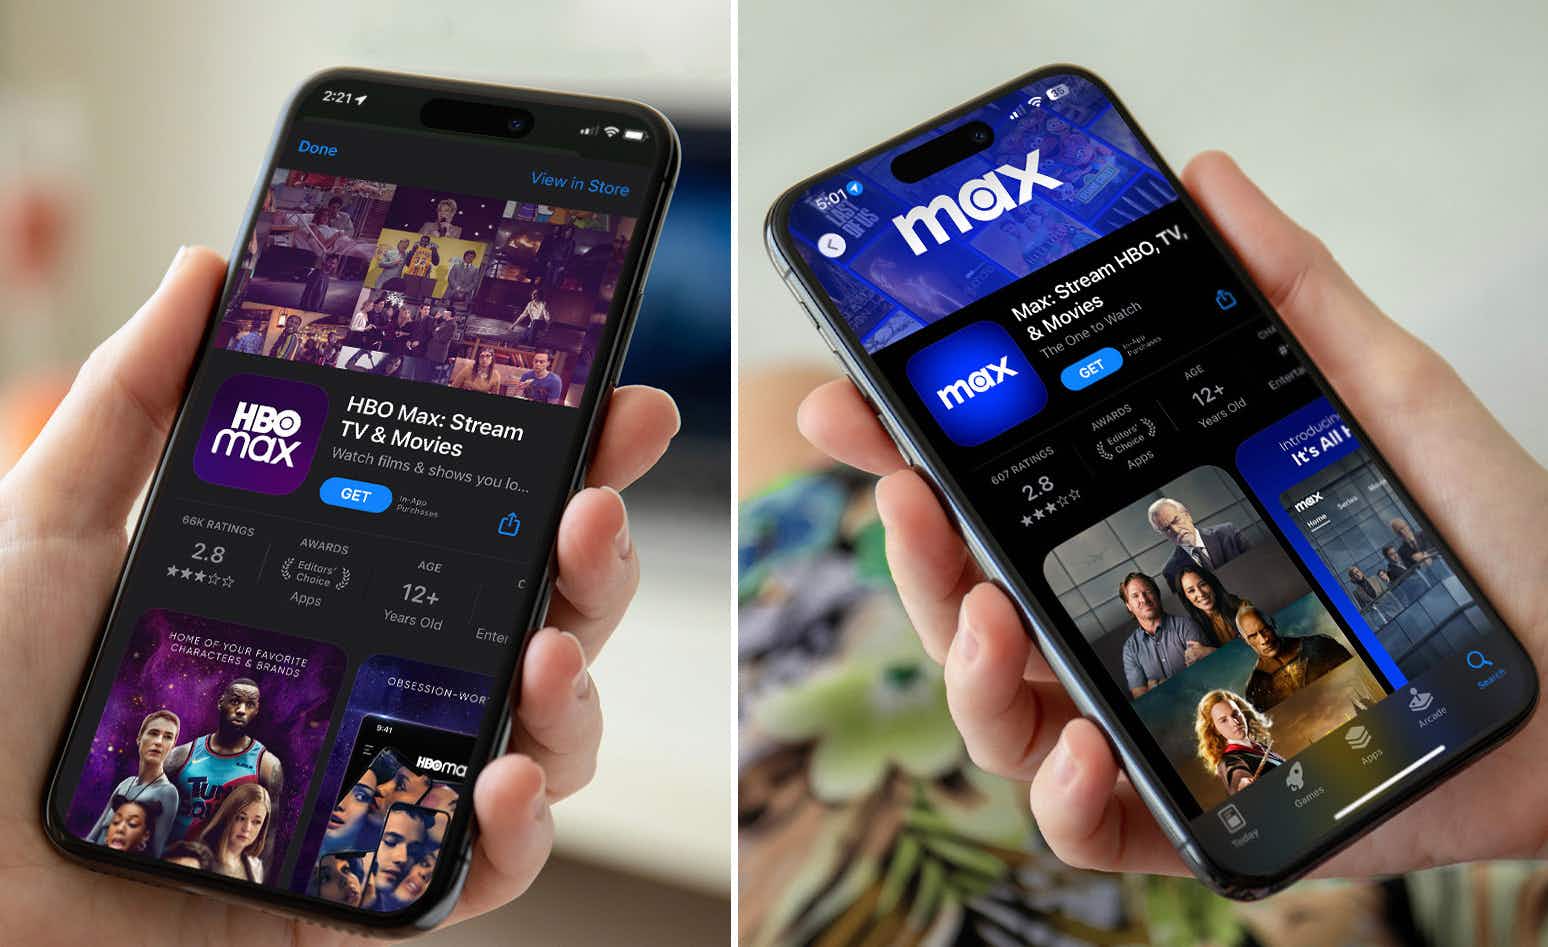 HBO Max Delivers New Mobile And Desktop Apps For An Improved User  Experience Globally